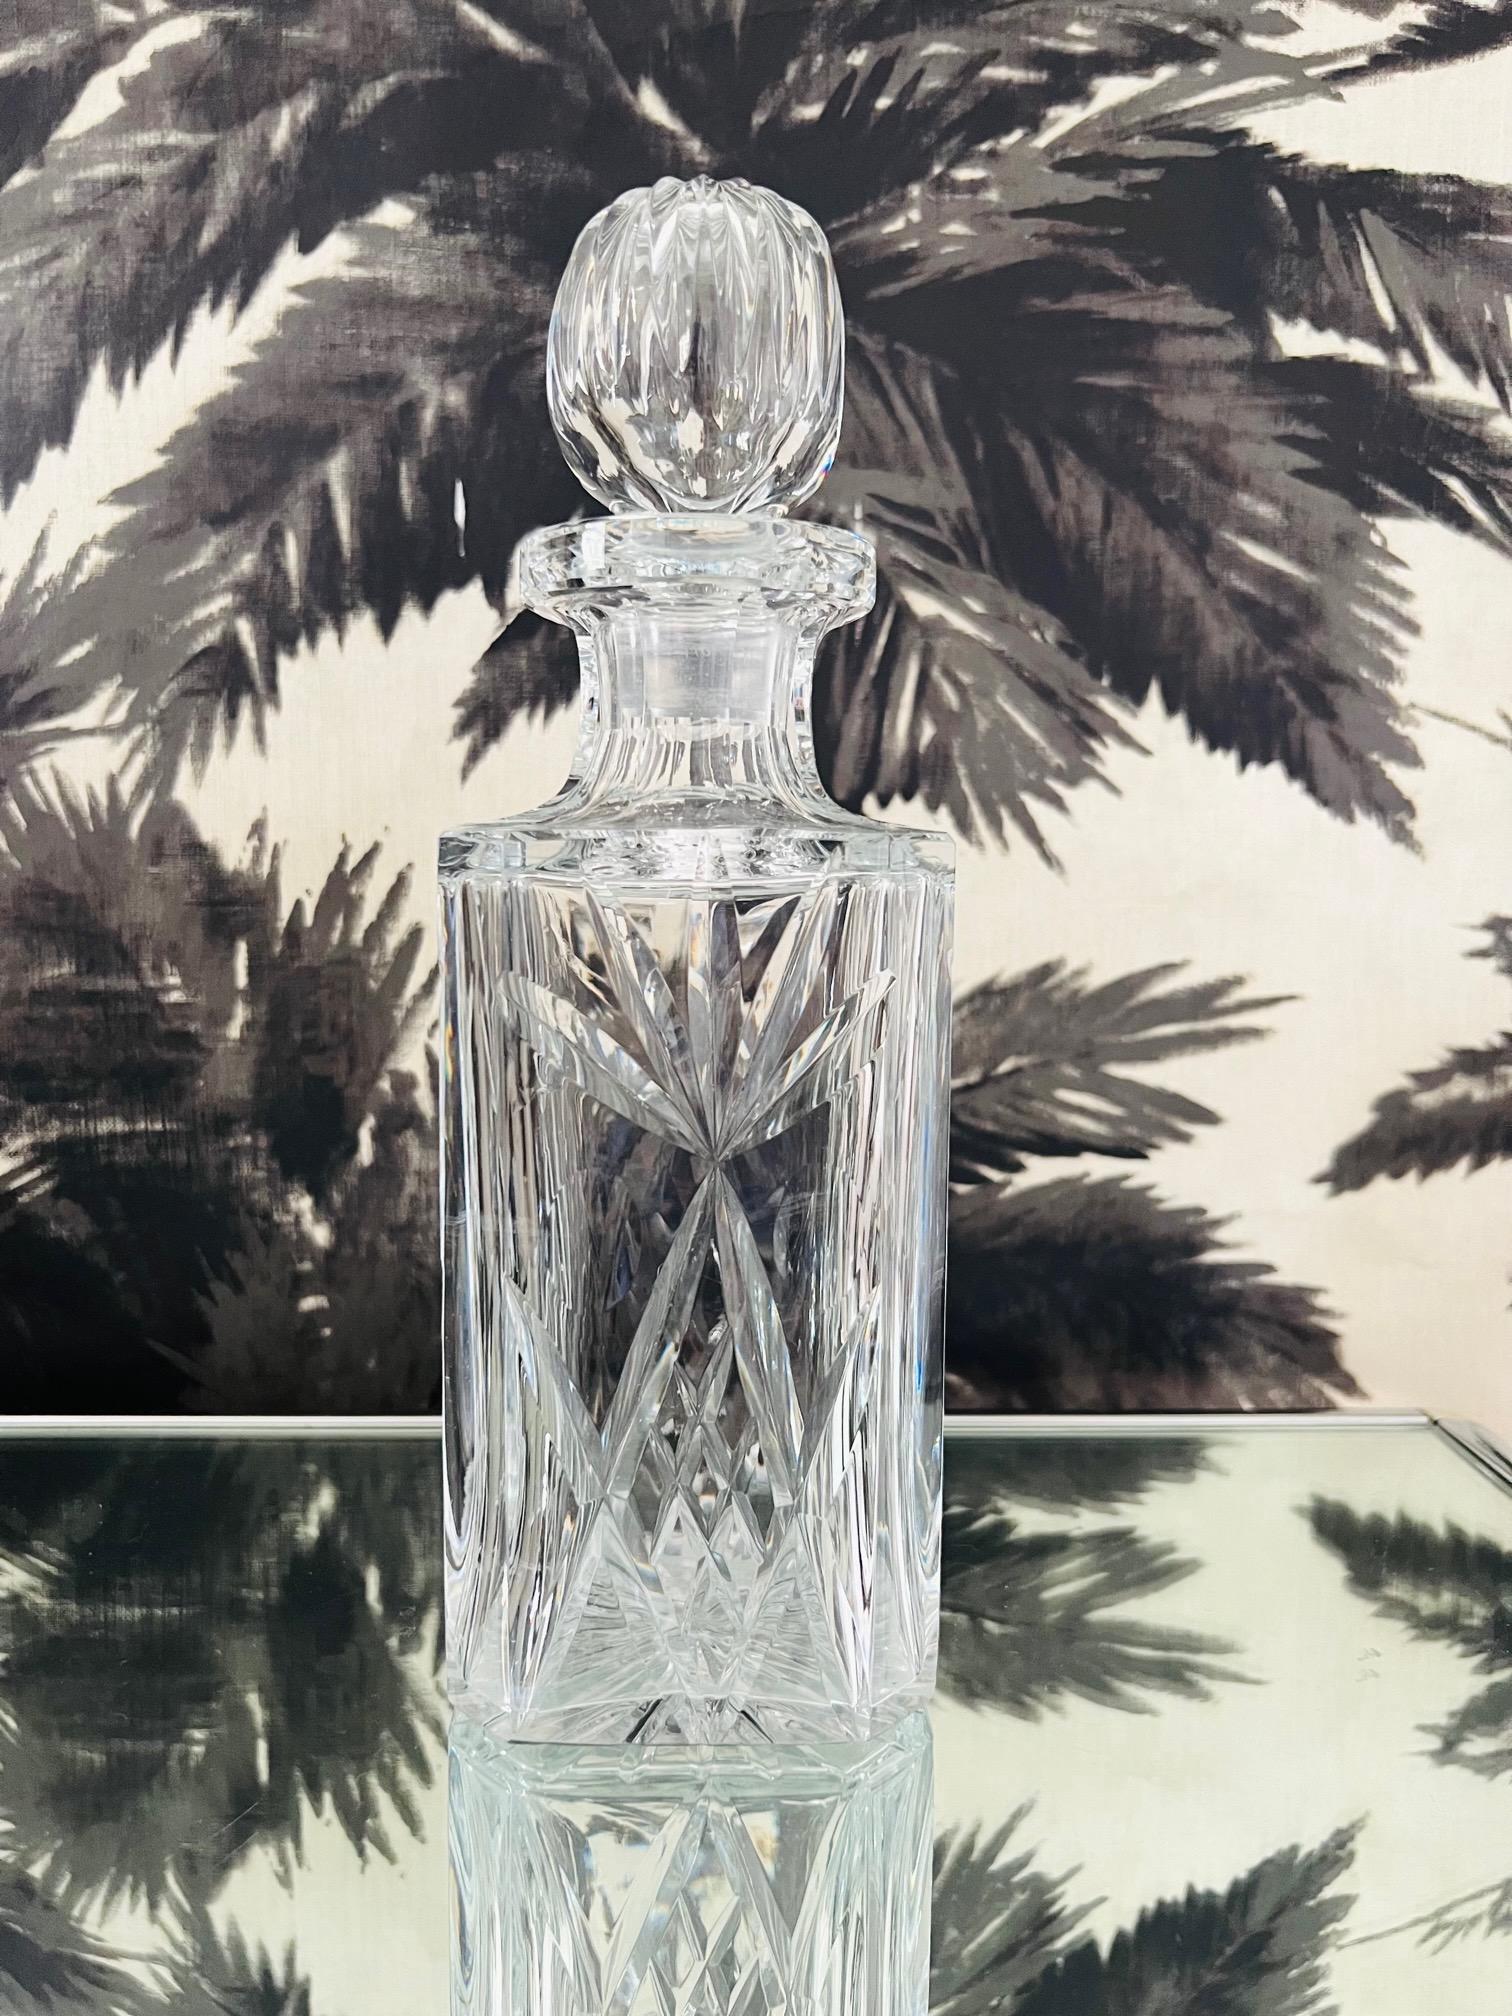 Elegant mouth blown and hand-cut crystal whiskey decanter by Waterford Crystal. The decanter has a square form with etched starburst designs, etched diamond cuts, and faceted crystal stem. Includes a stylized crystal ball stopper with etched